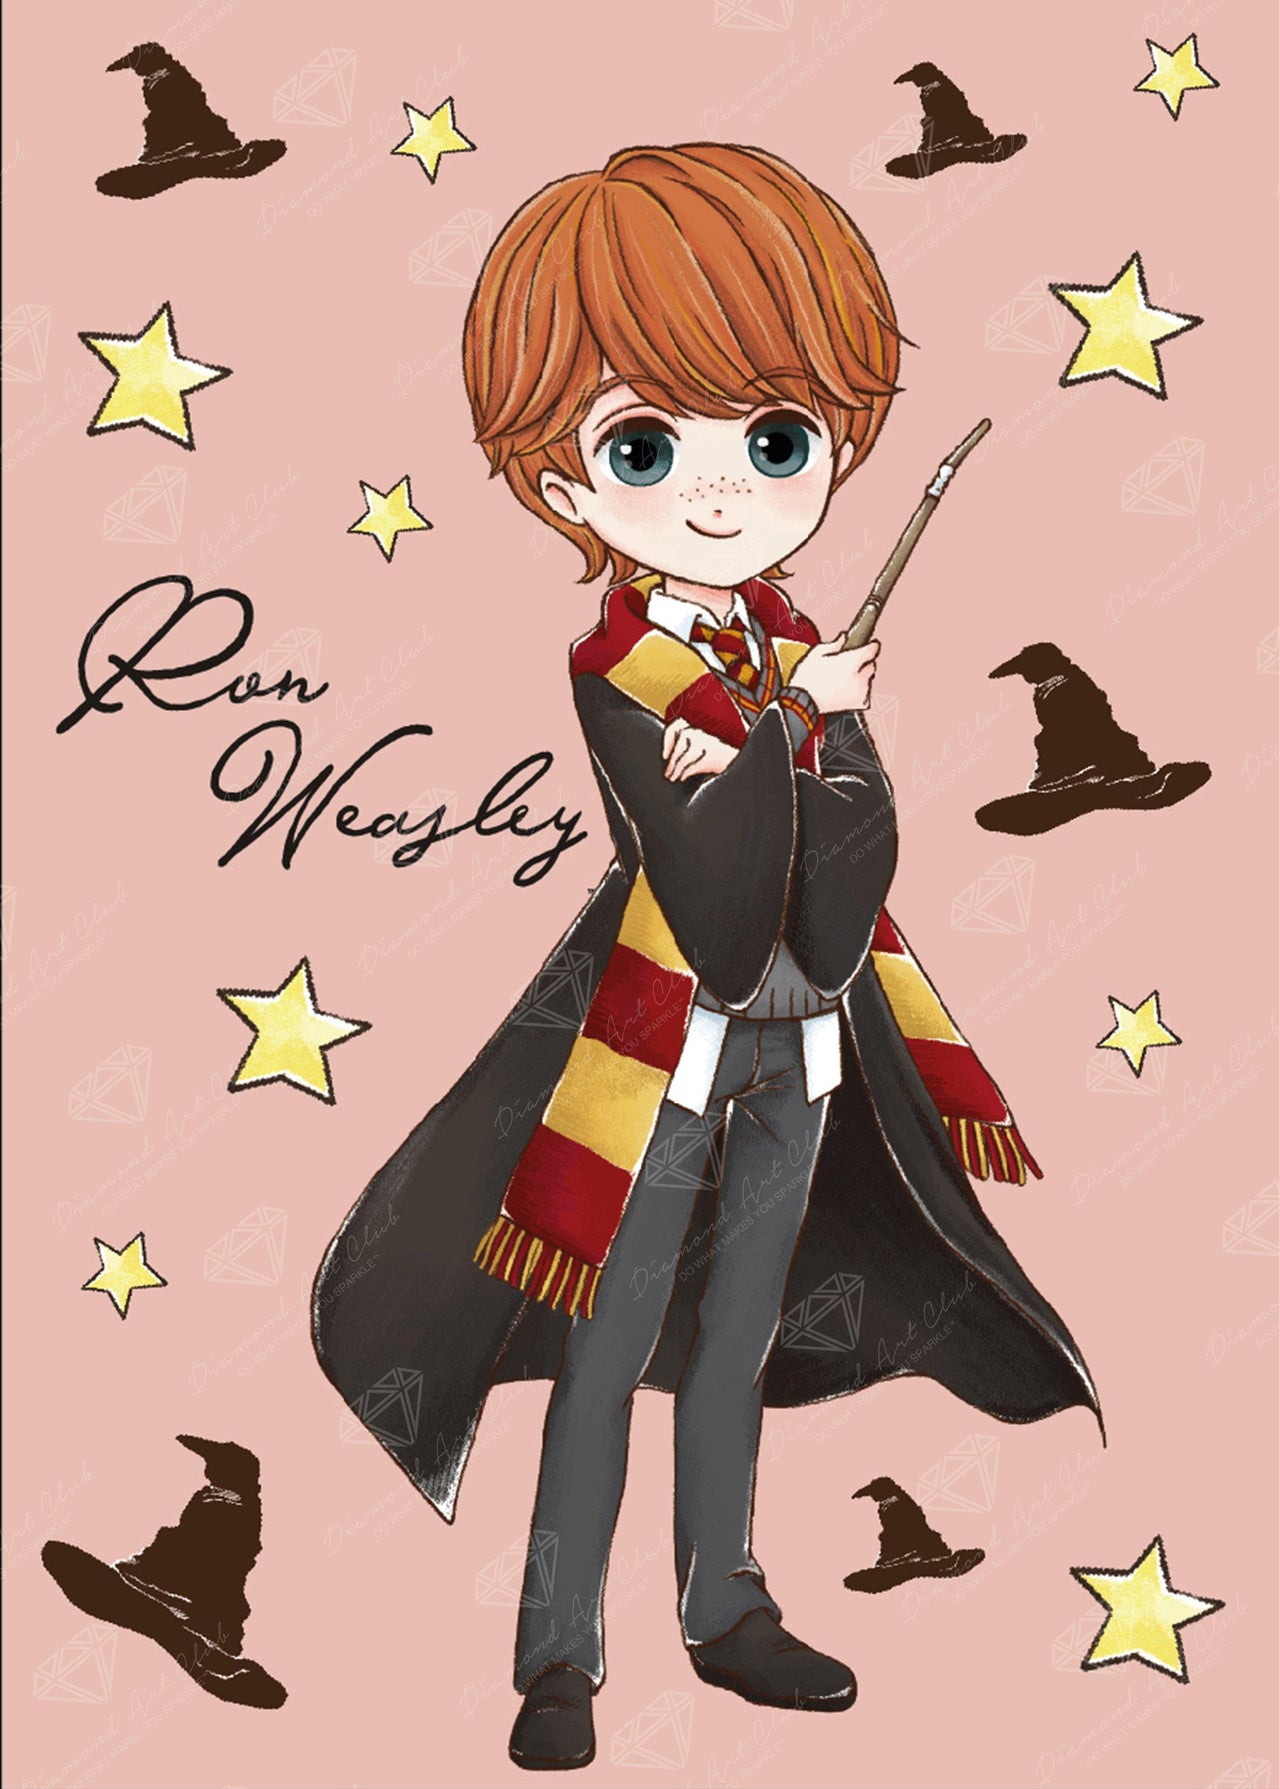 Diamond Painting Ron Weasley - Magical 22" x 28″ (56cm x 71cm) / Square With 30 Colors Including 4 ABs / 56,481